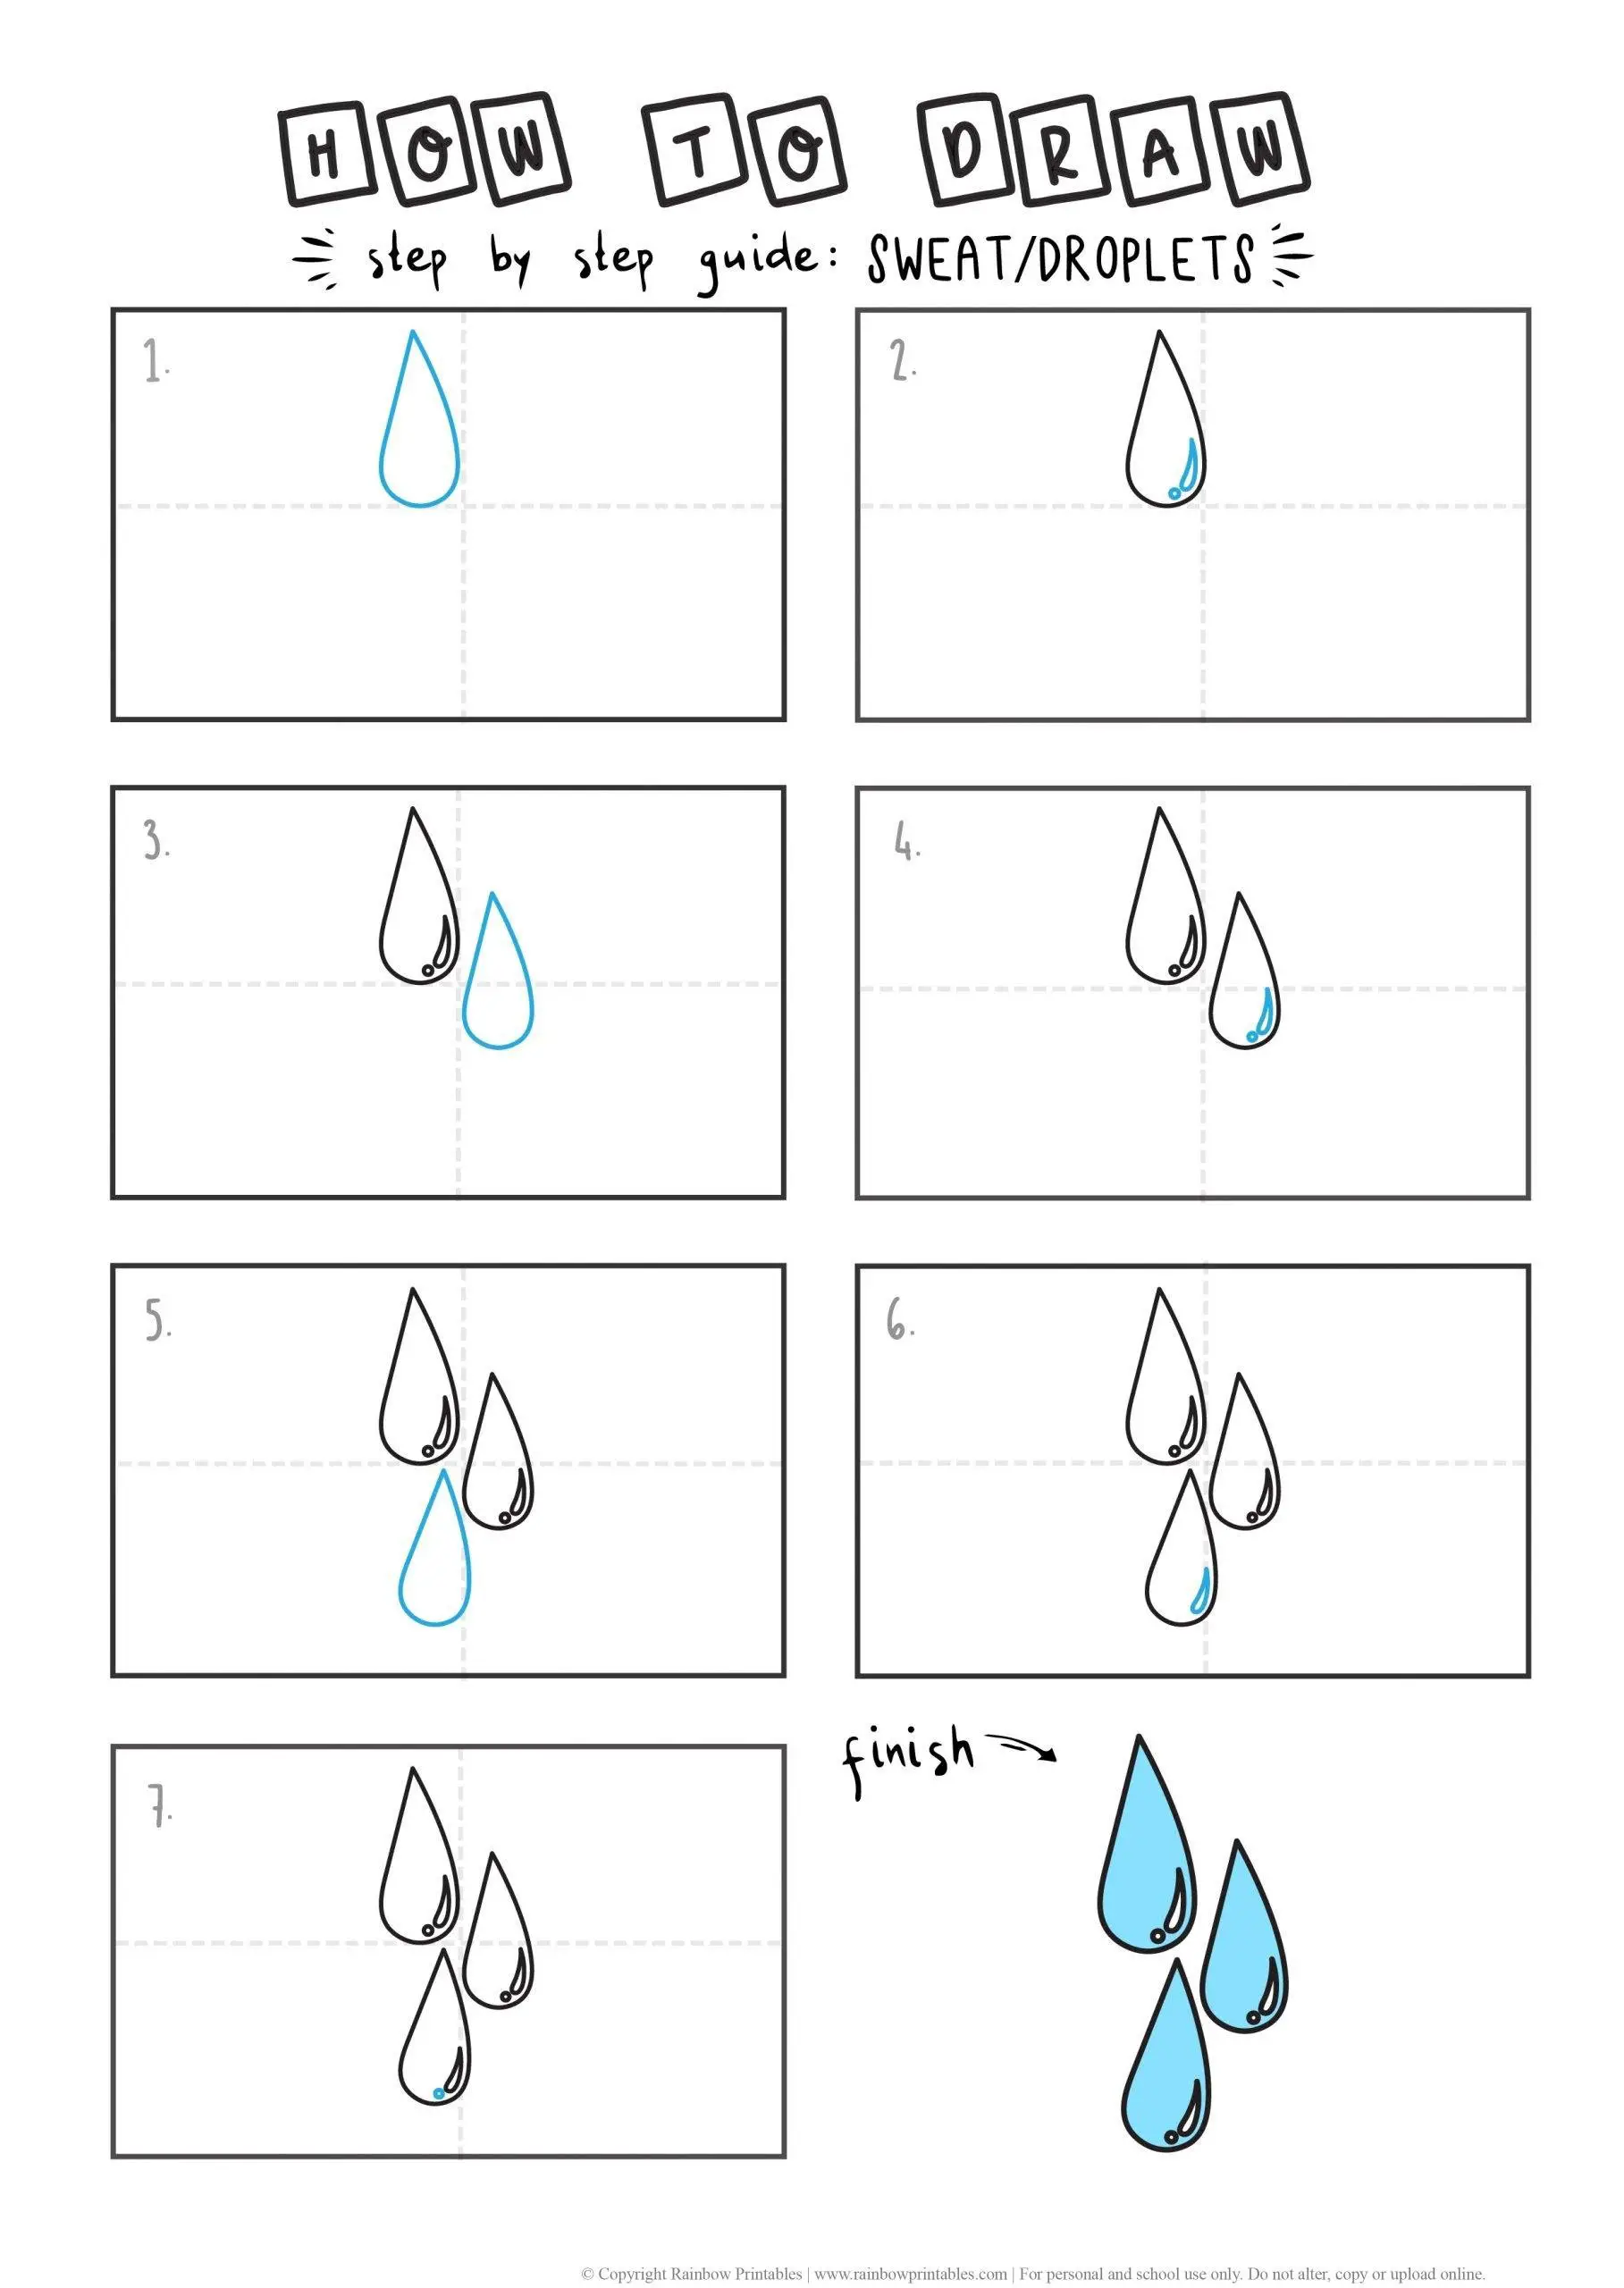 HOW TO DRAW SWEAT DROPLETS FOR KIDS